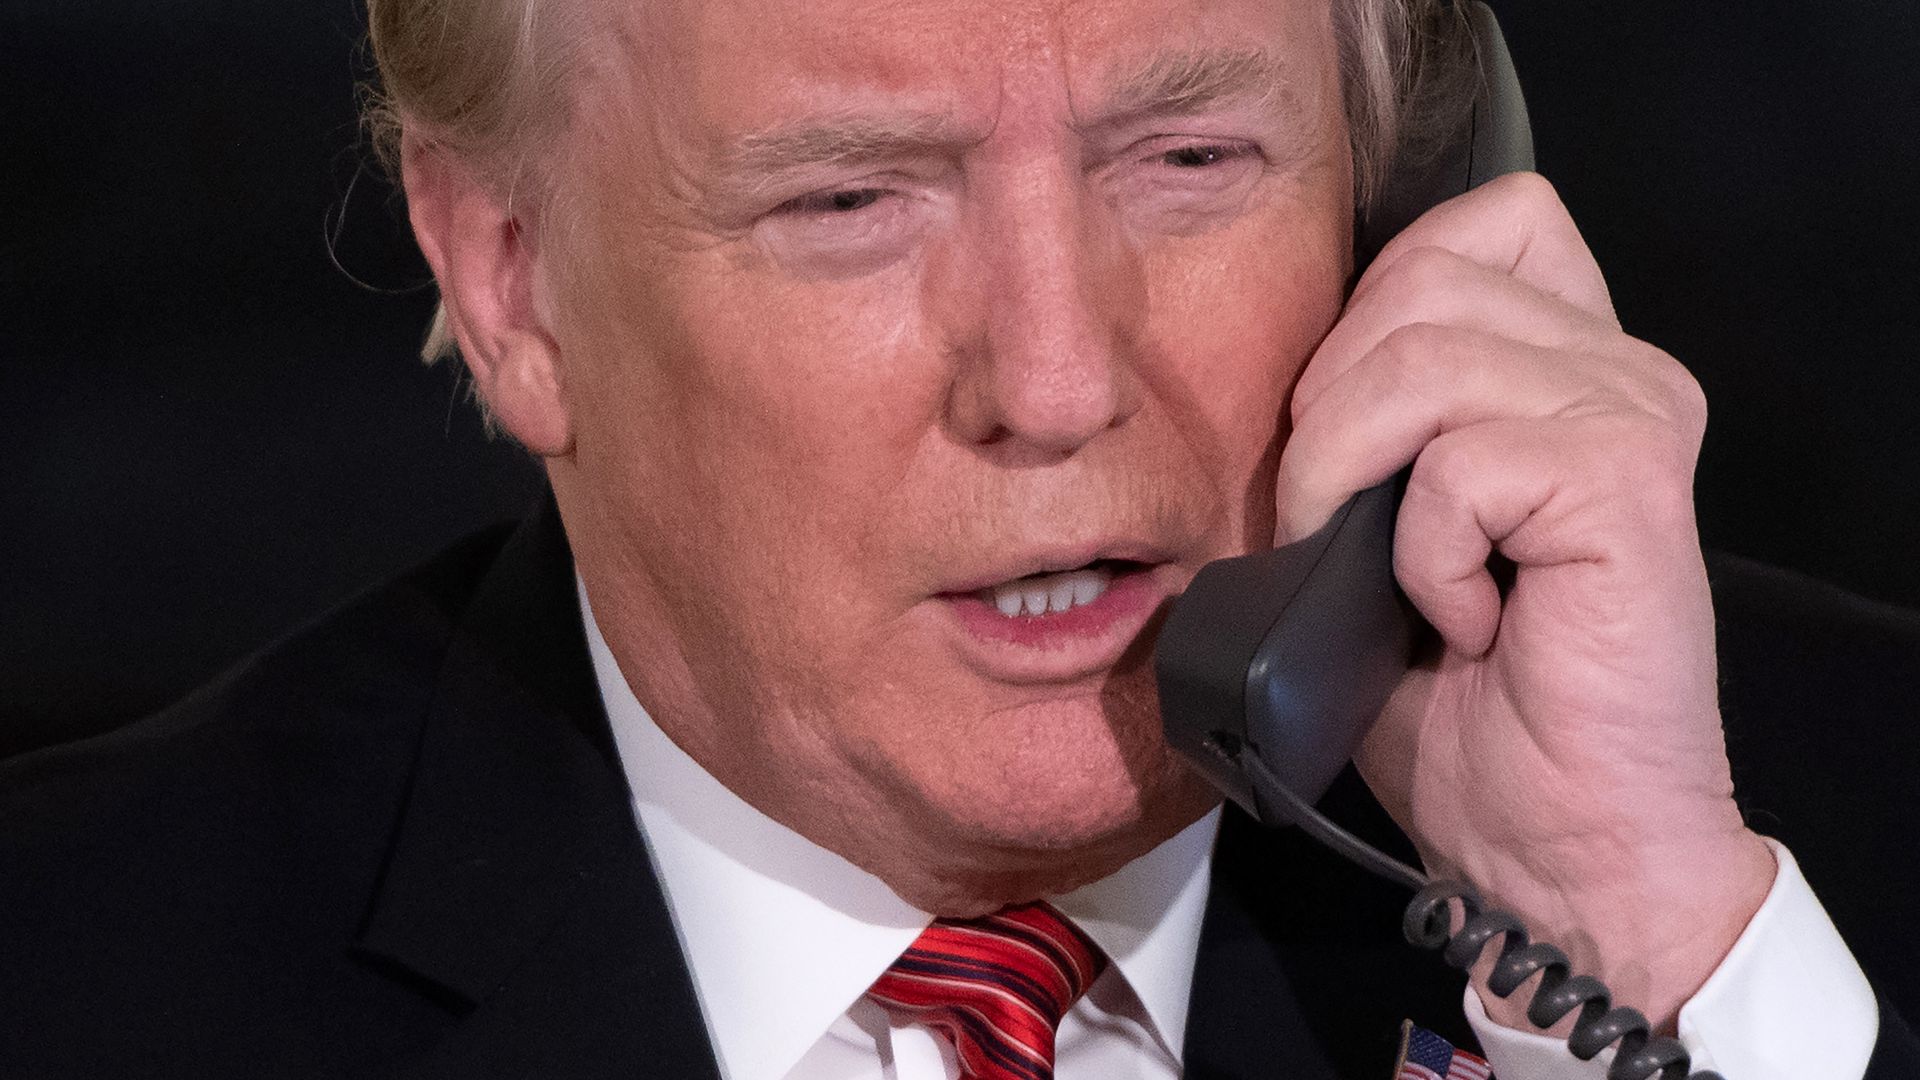 A close-up image of then-President Donald Trump with a landline phone receiver to his left ear.